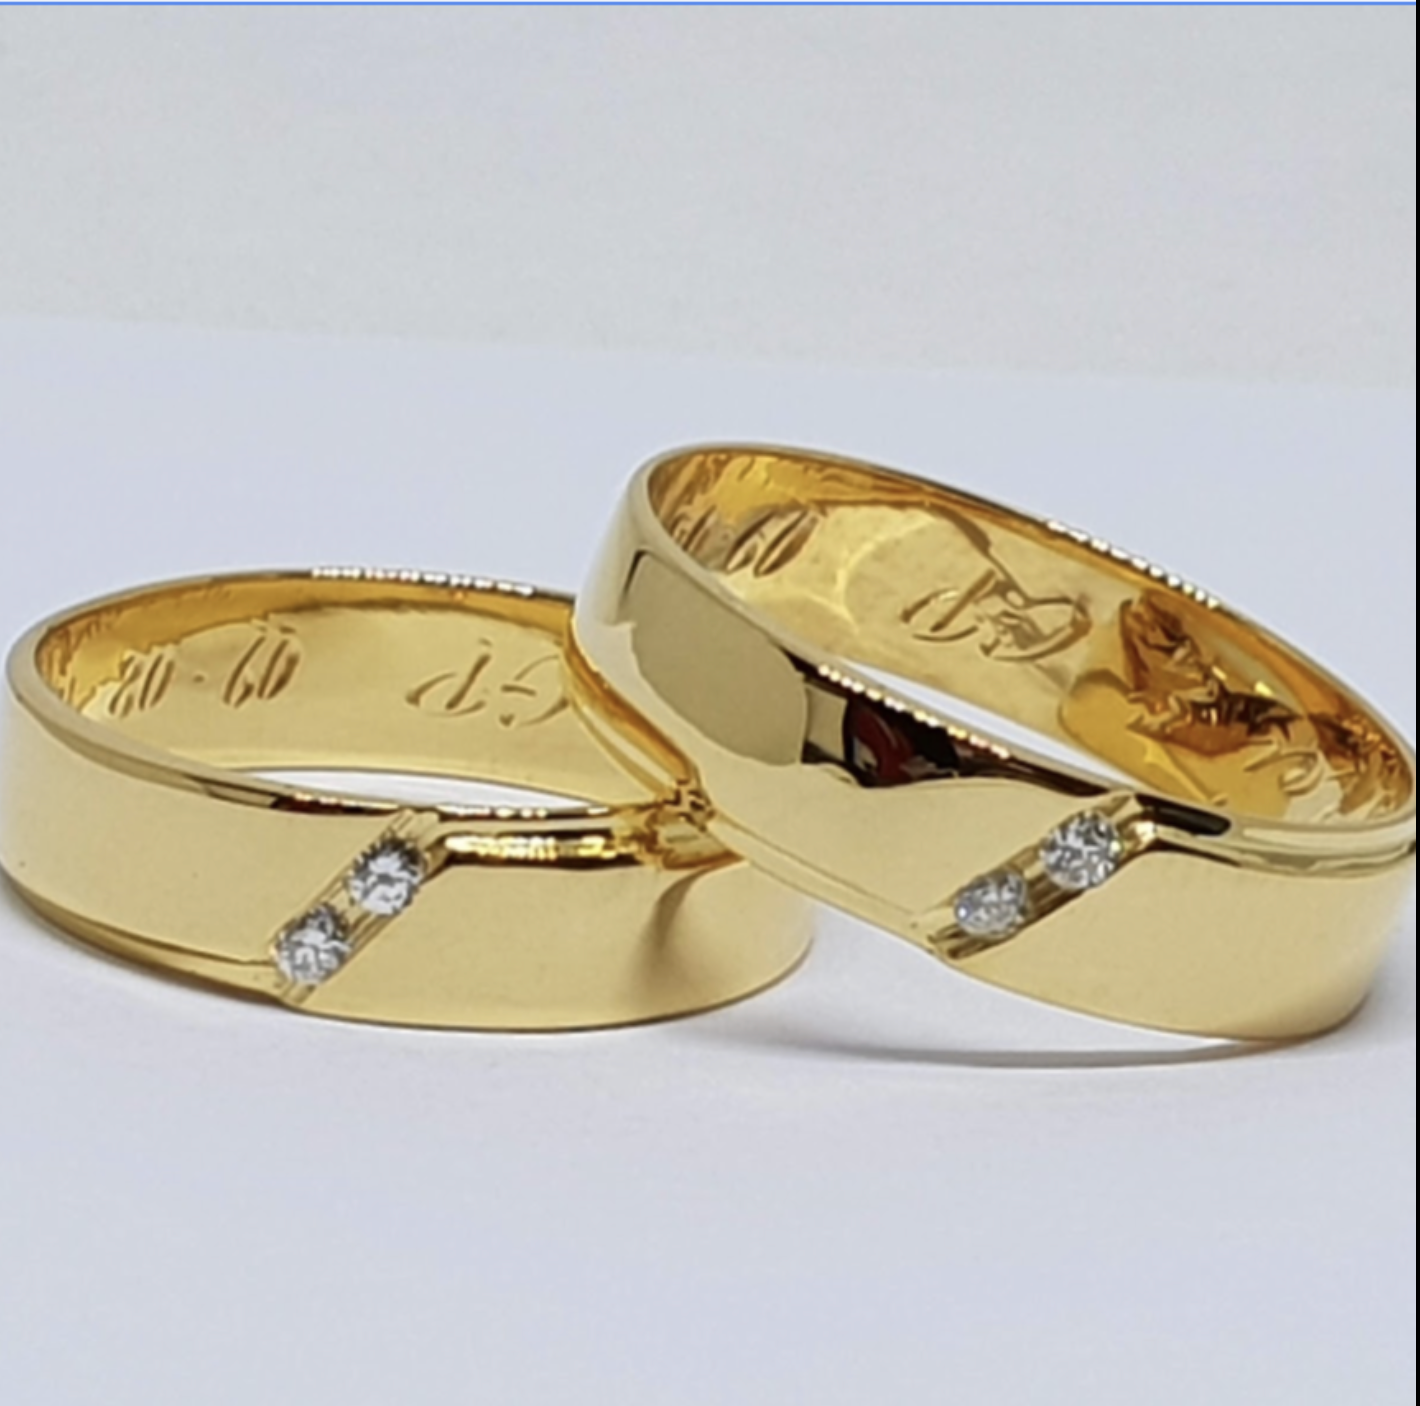 Matching wedding rings set made of two colors of gold